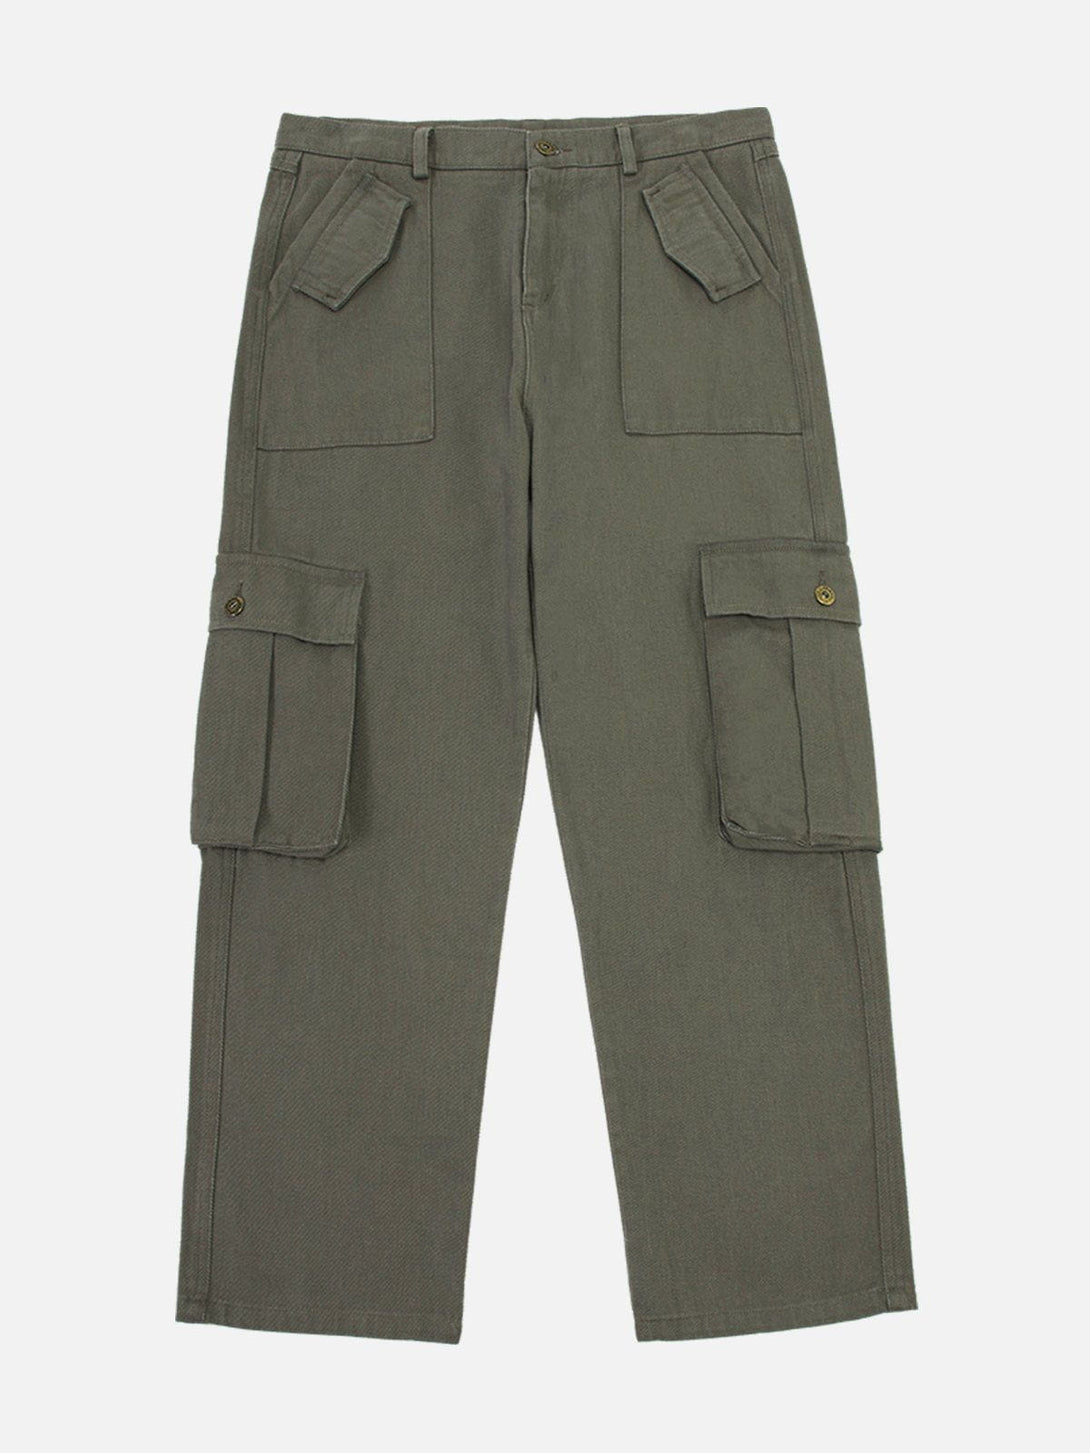 Levefly - Patchwork Loose Cargo Pants - Streetwear Fashion - levefly.com